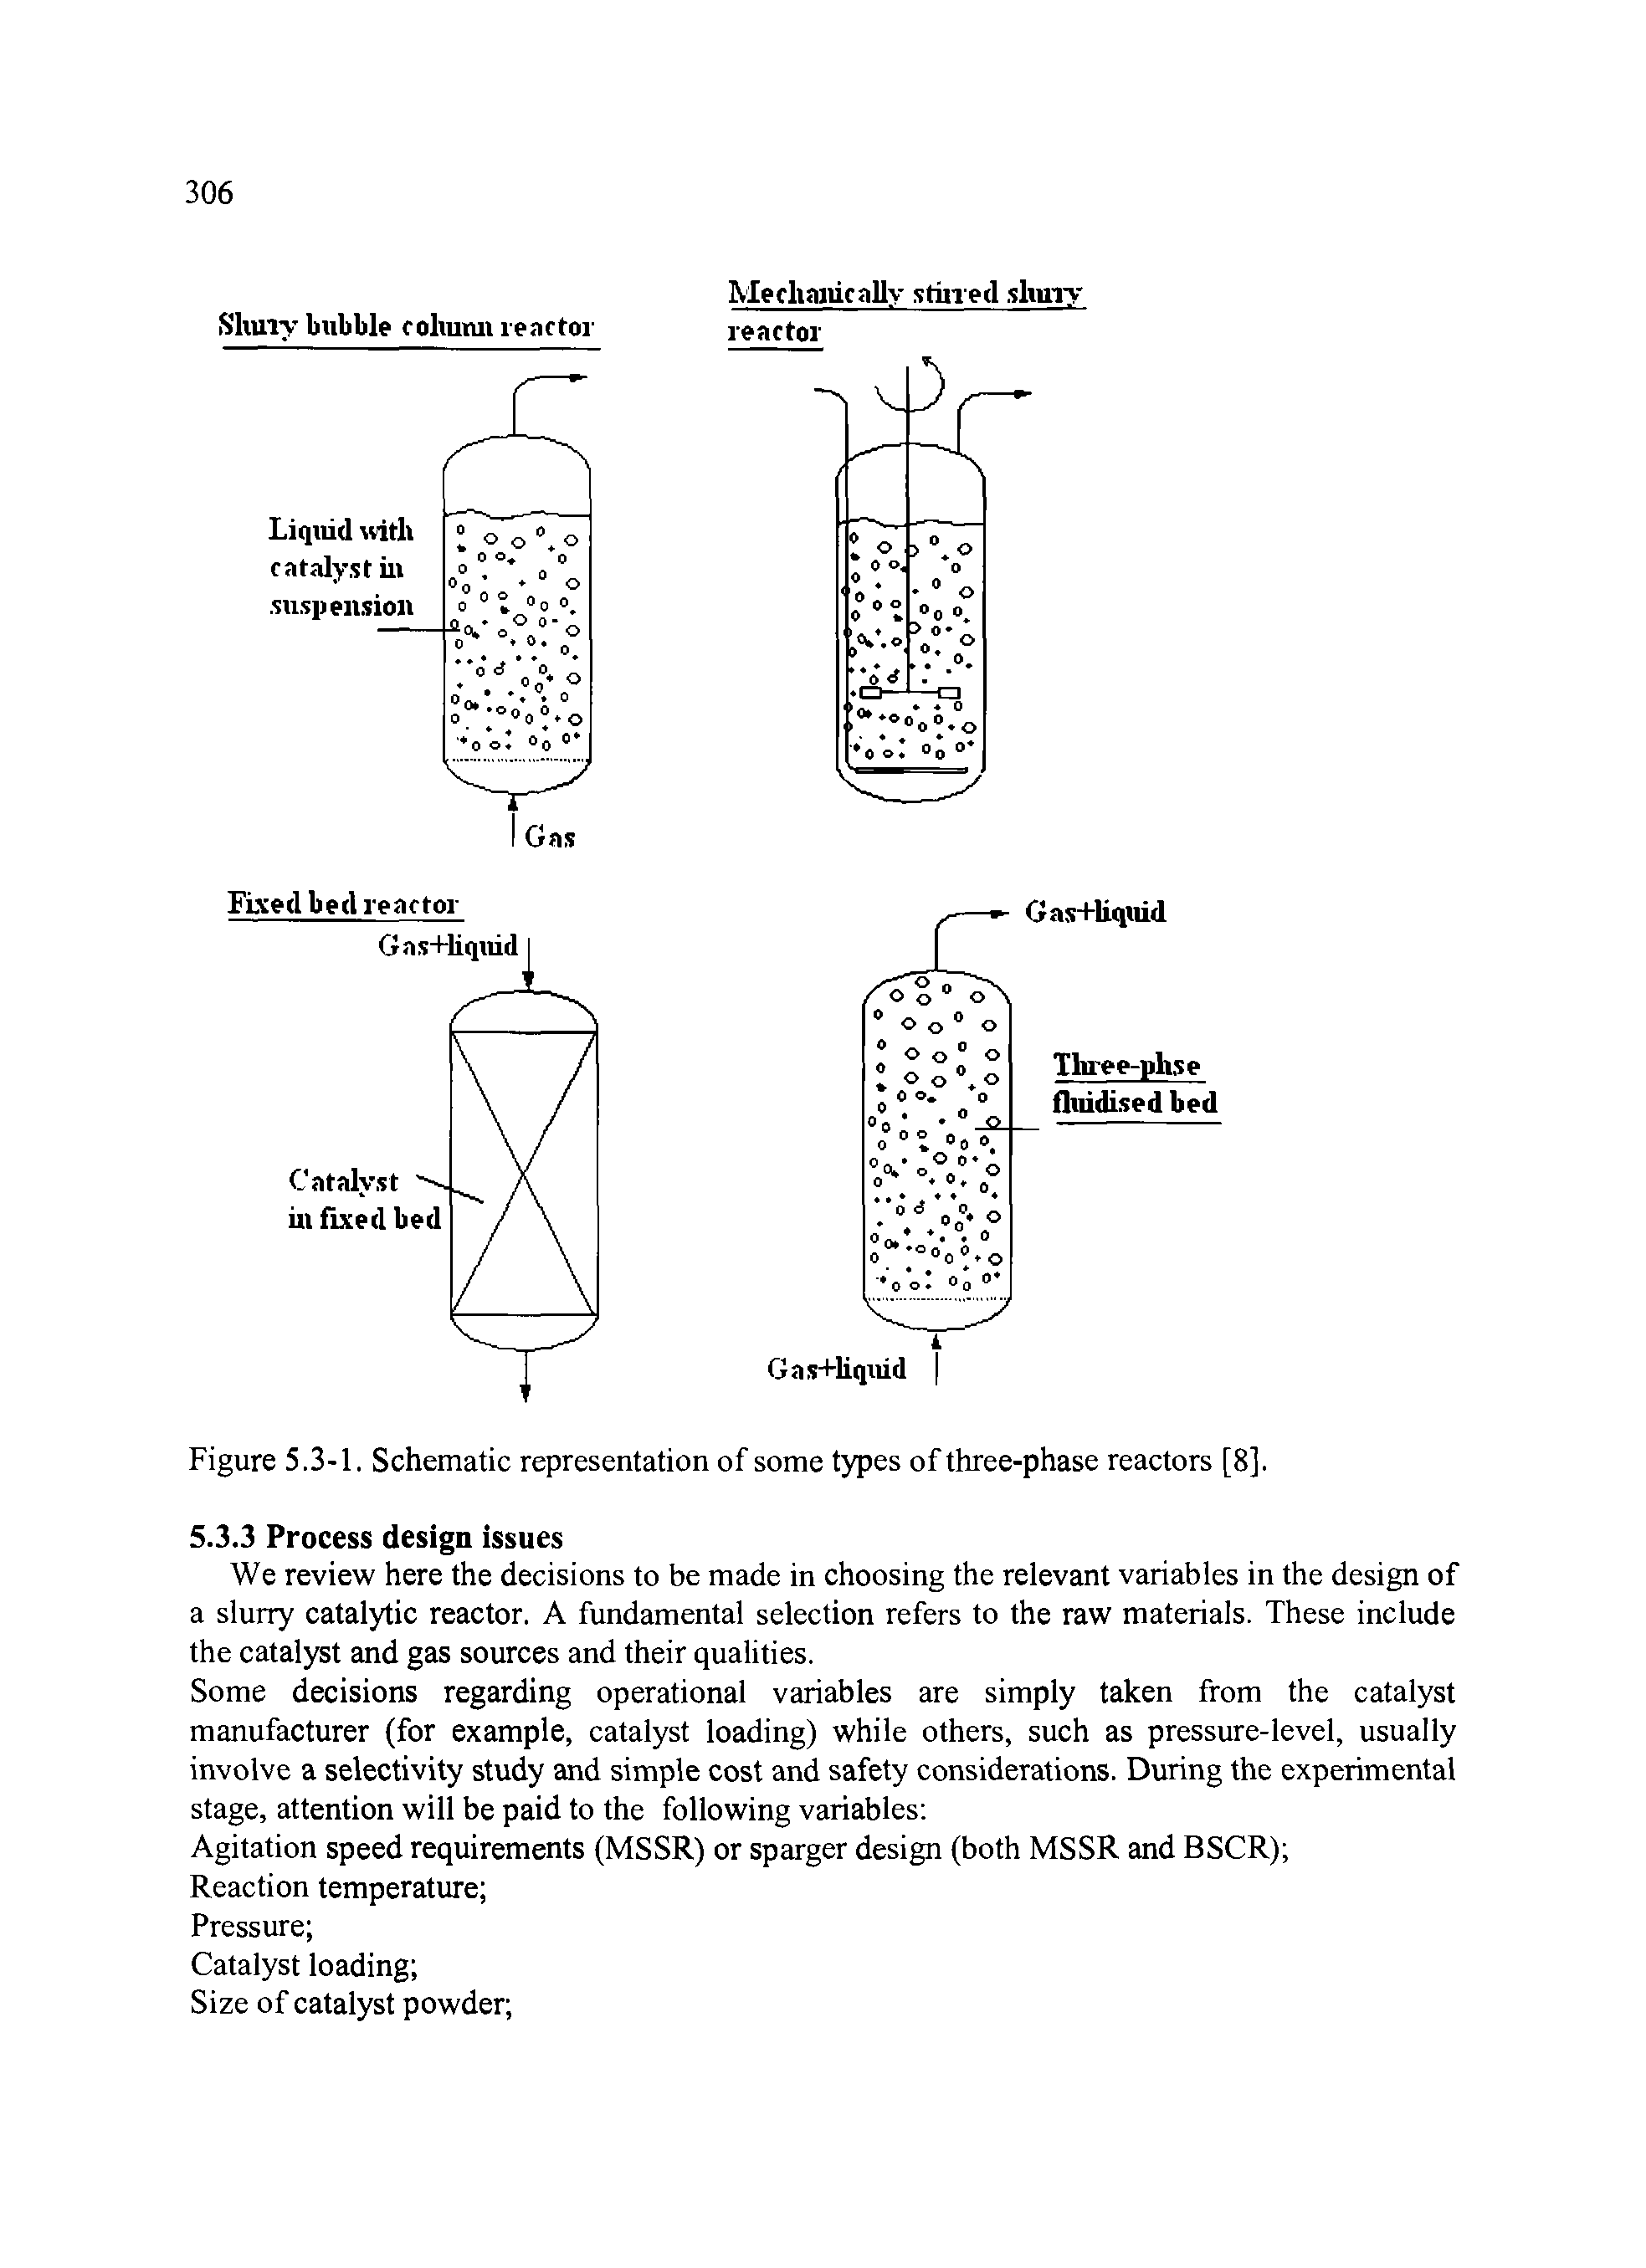 Figure 5.3-1. Schematic representation of some types of three-phase reactors [8].